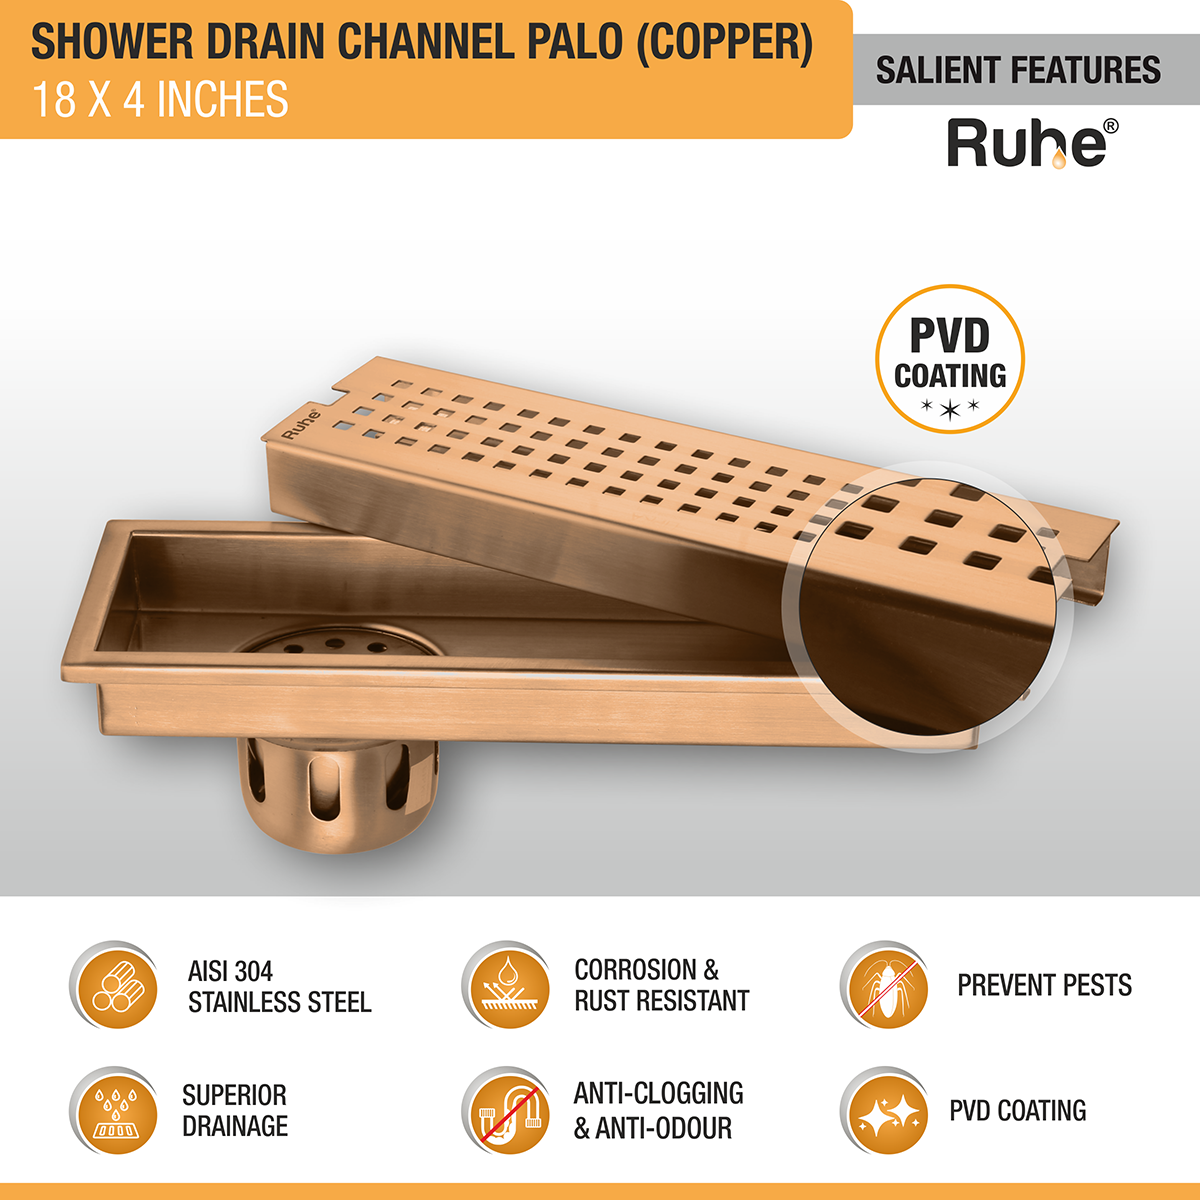 Palo Shower Drain Channel (18 x 4 Inches) ROSE GOLD/ANTIQUE COPPER features